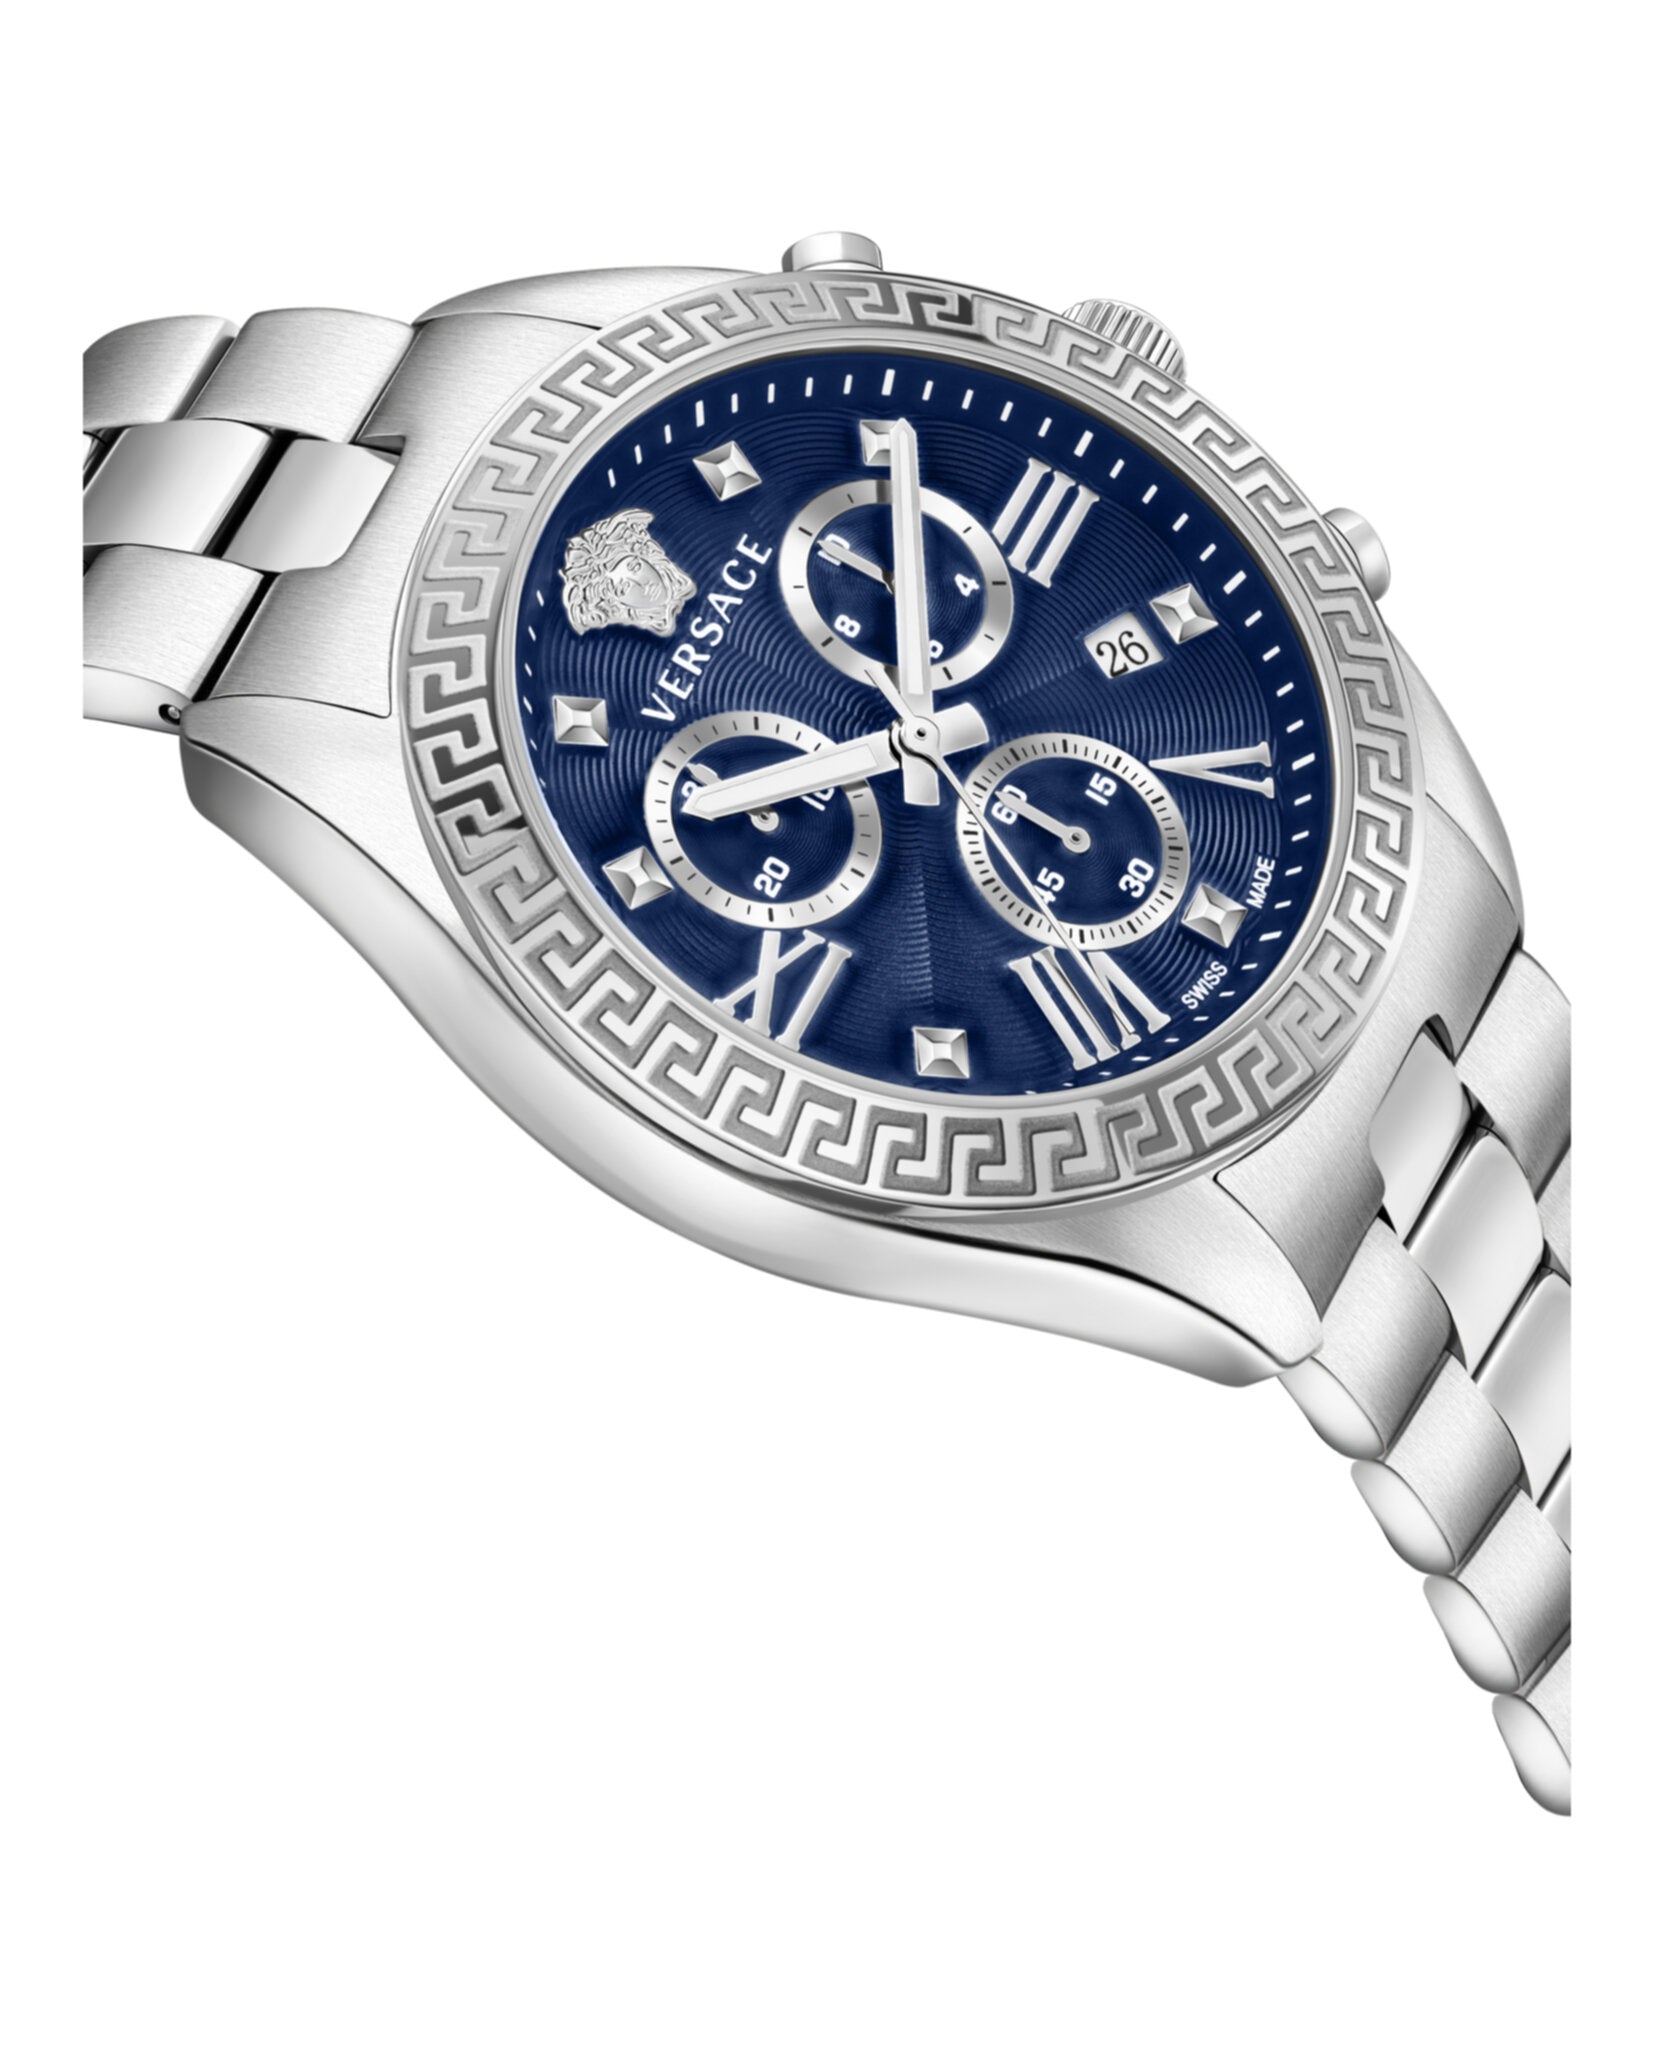 Womens | MadaLuxe Time Versace – Watches Madaluxe Greca Chrono Time